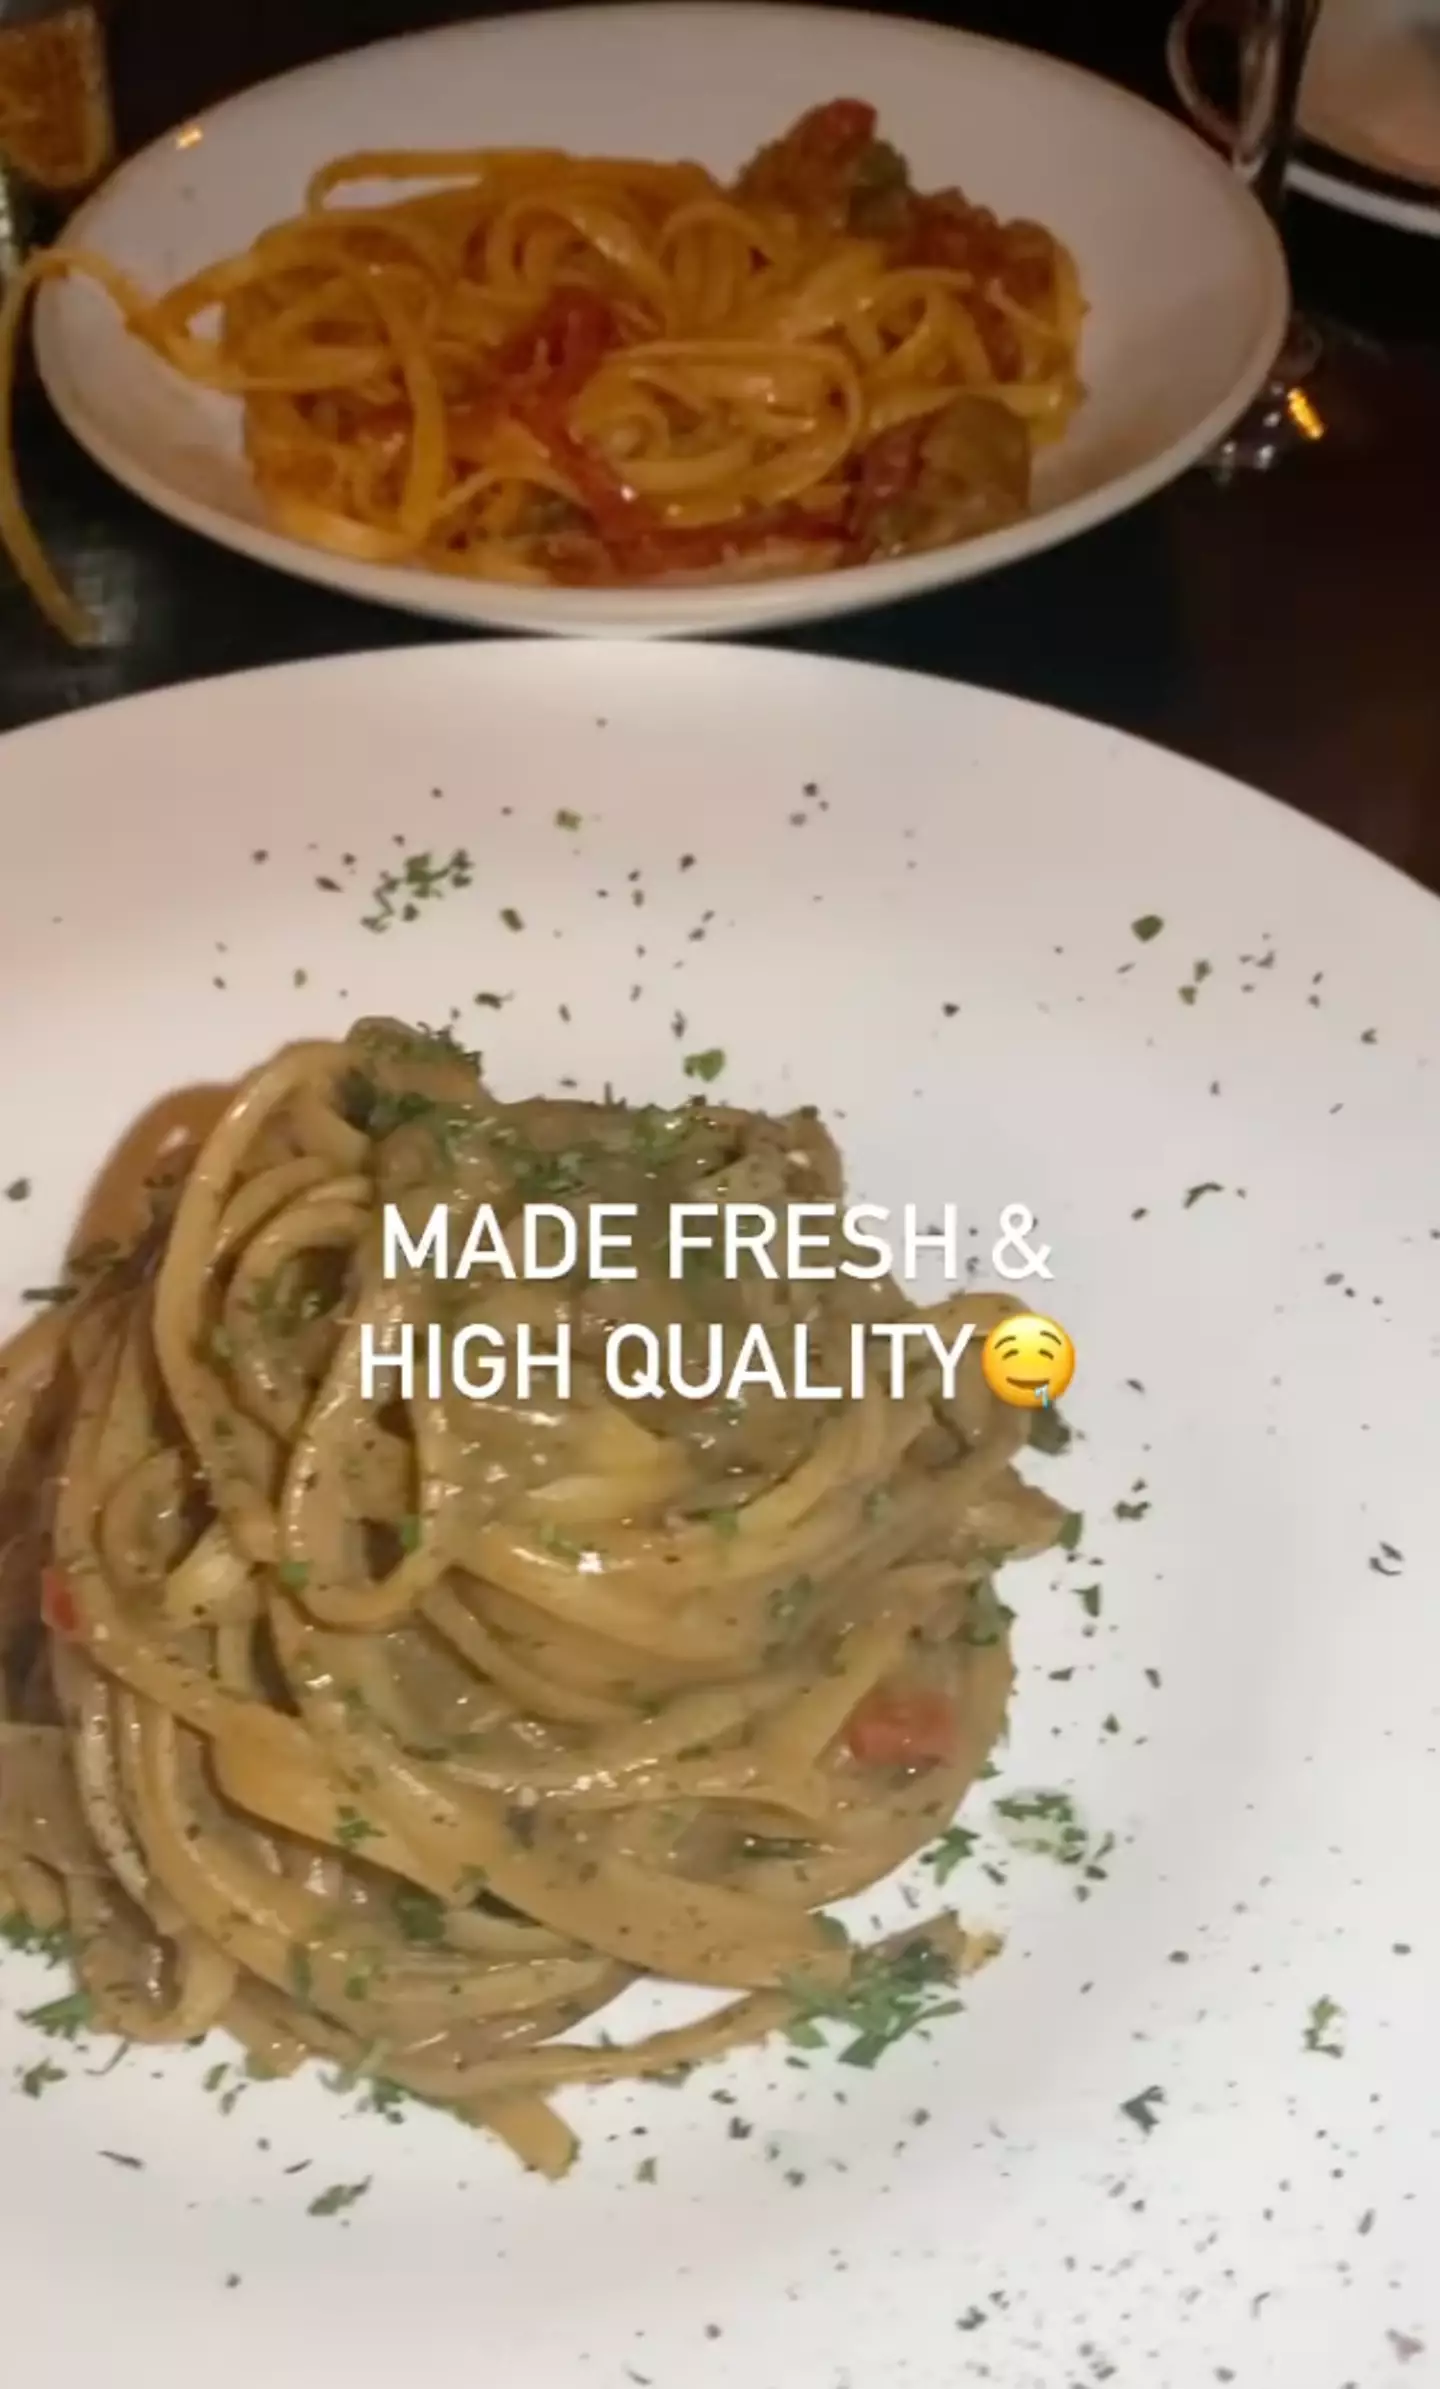 The pasta looks incredible.